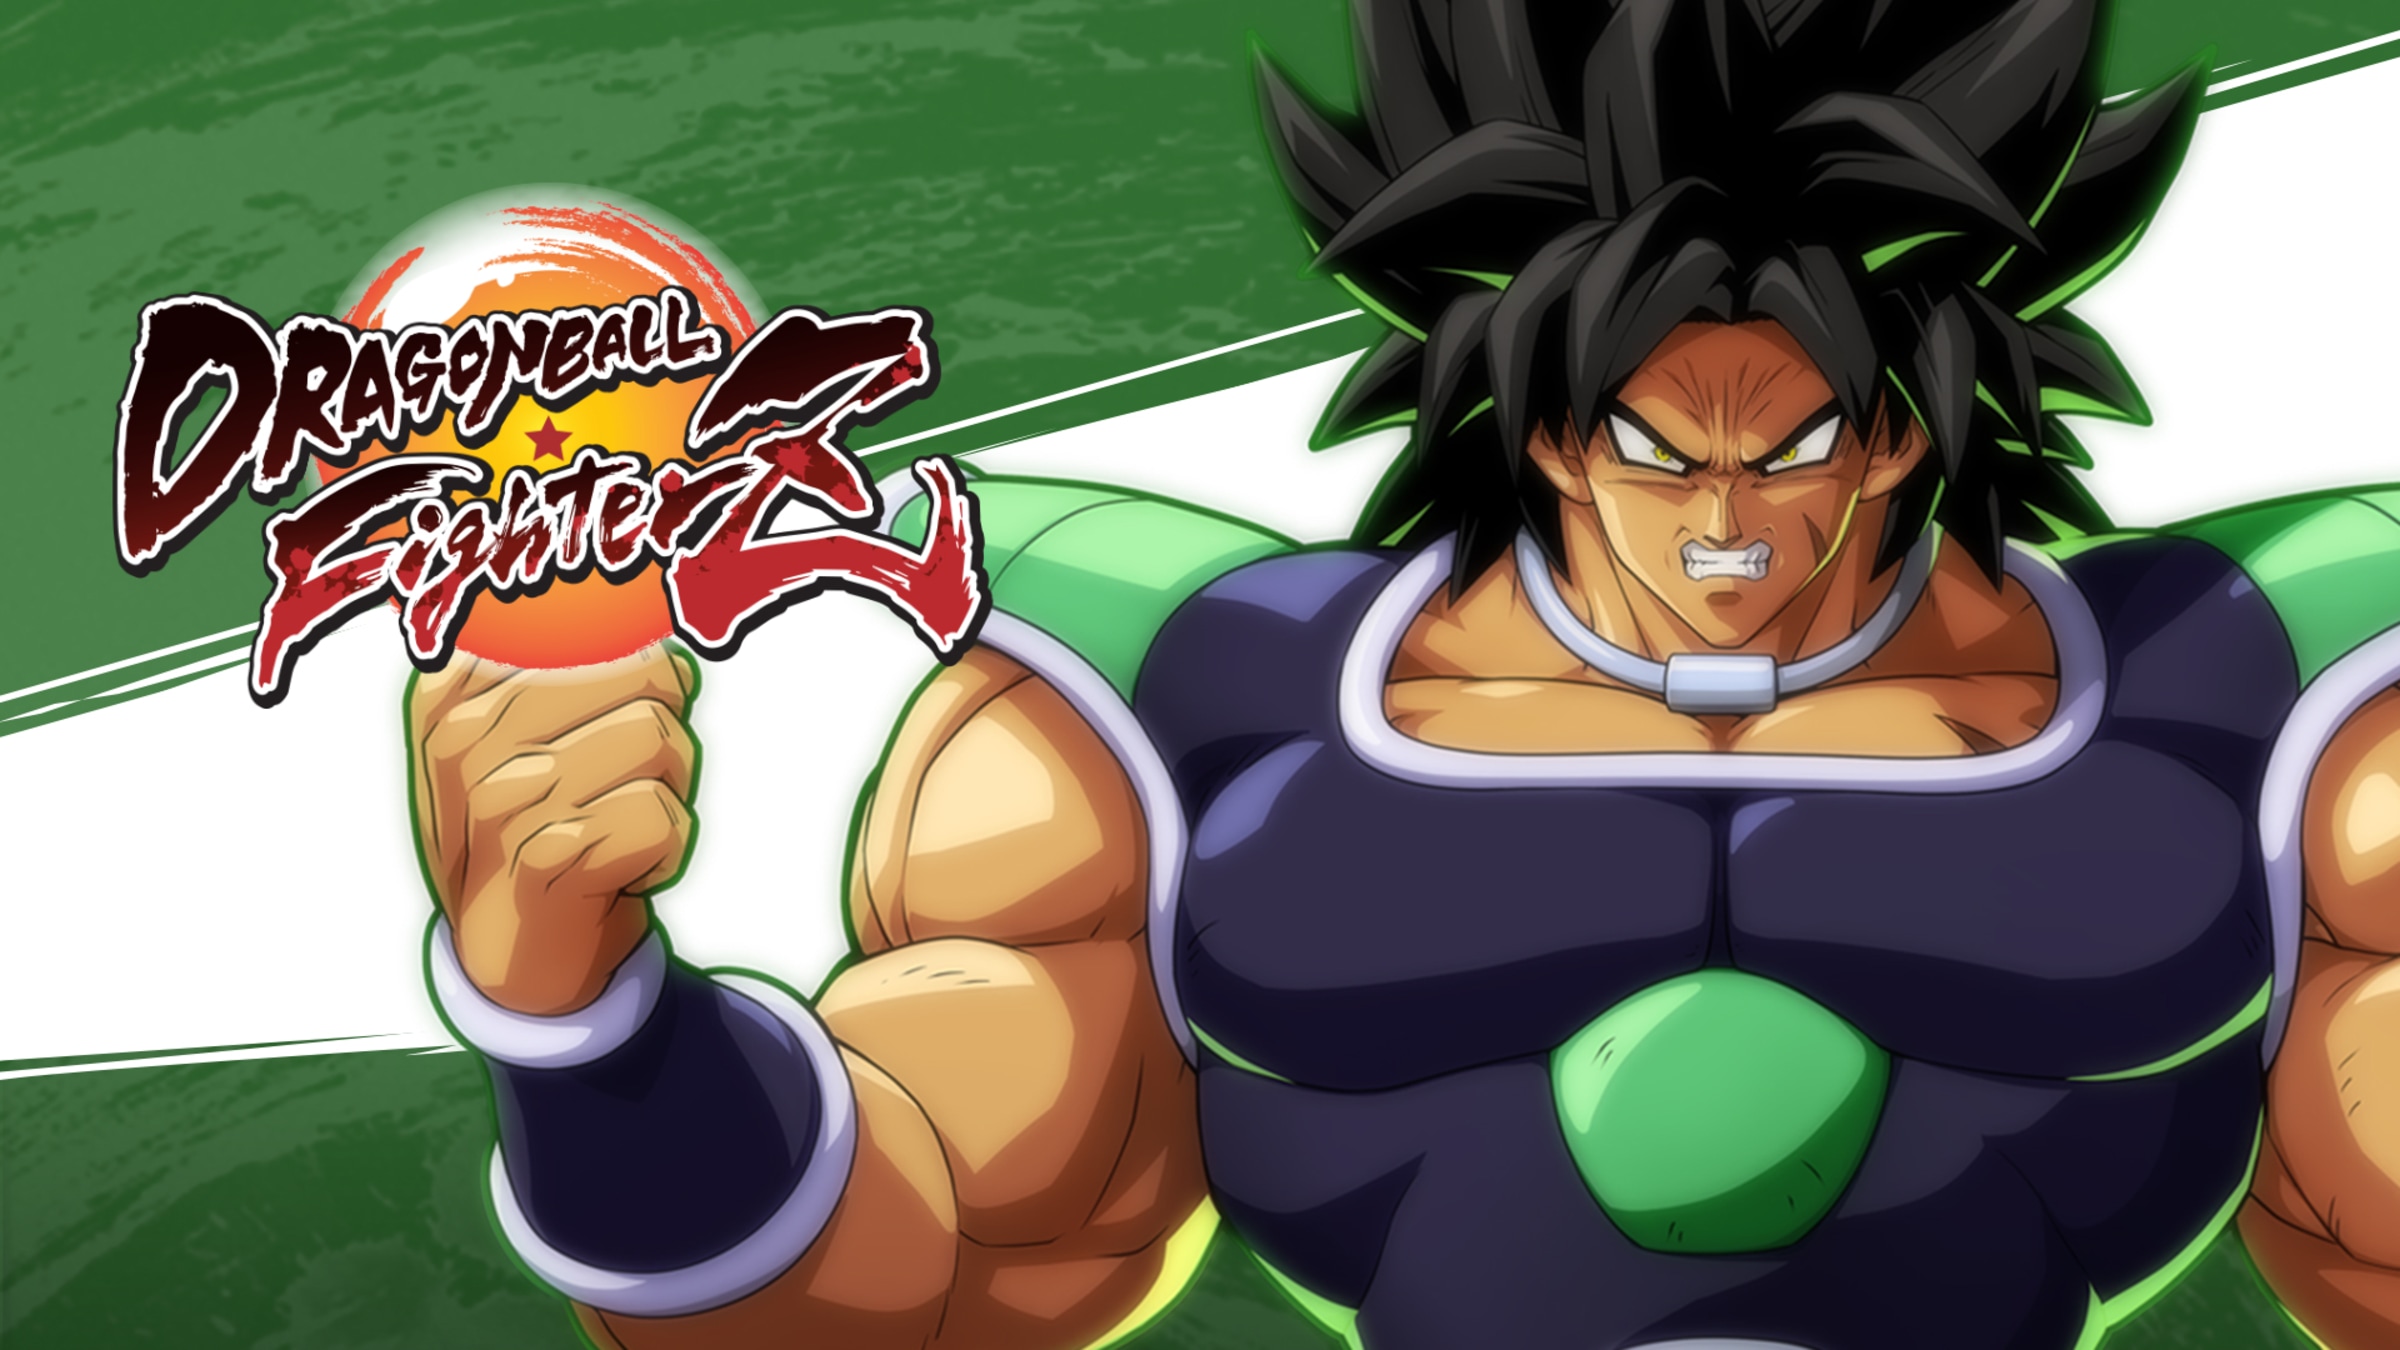 DRAGON BALL FIGHTERZ - for Nintendo Switch - Nintendo Official Site